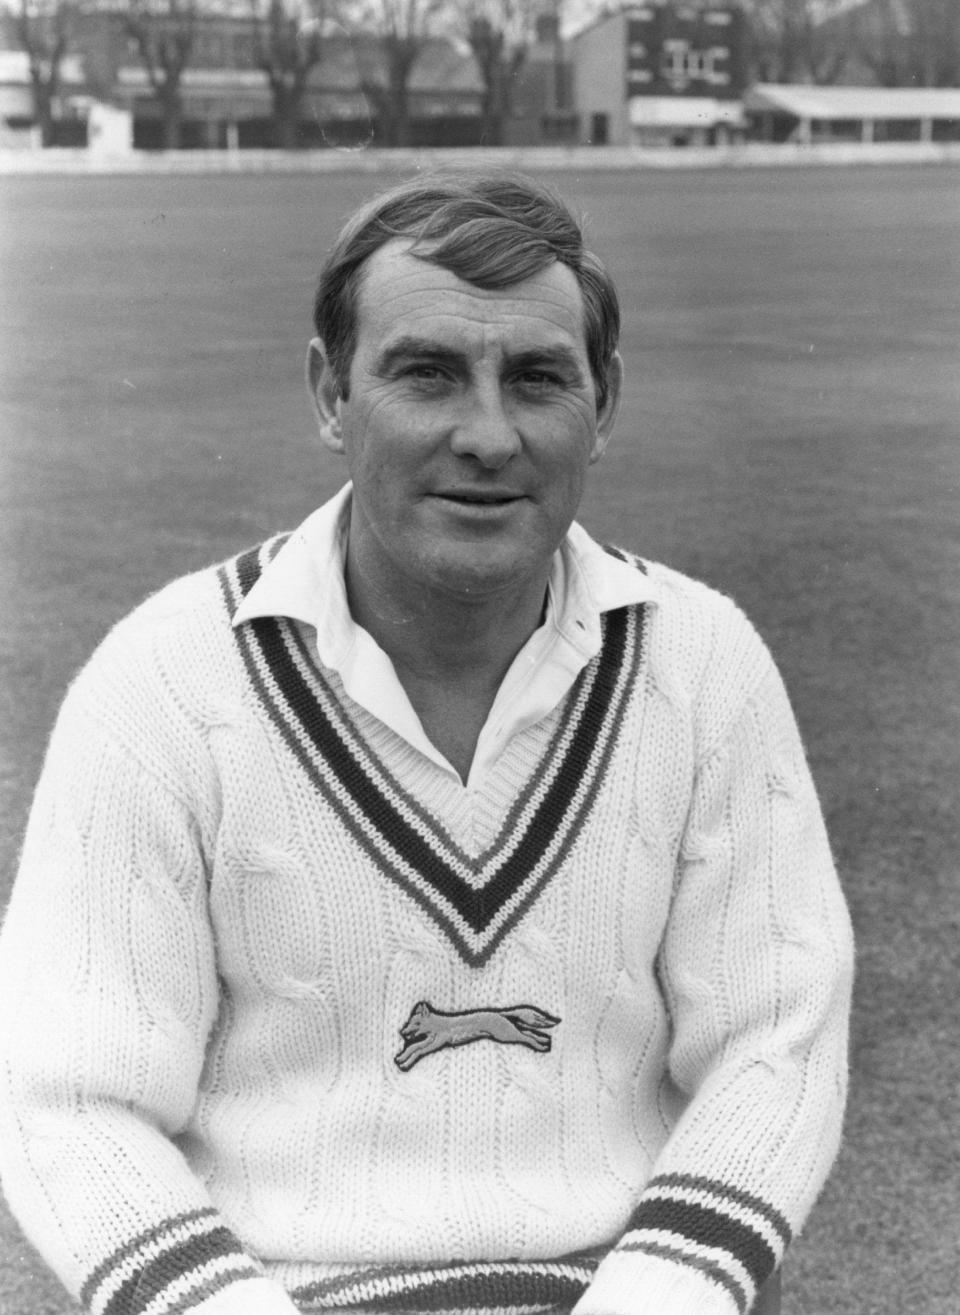 In 1974, during his time at Leicestershire - Evening Standard/Getty Images